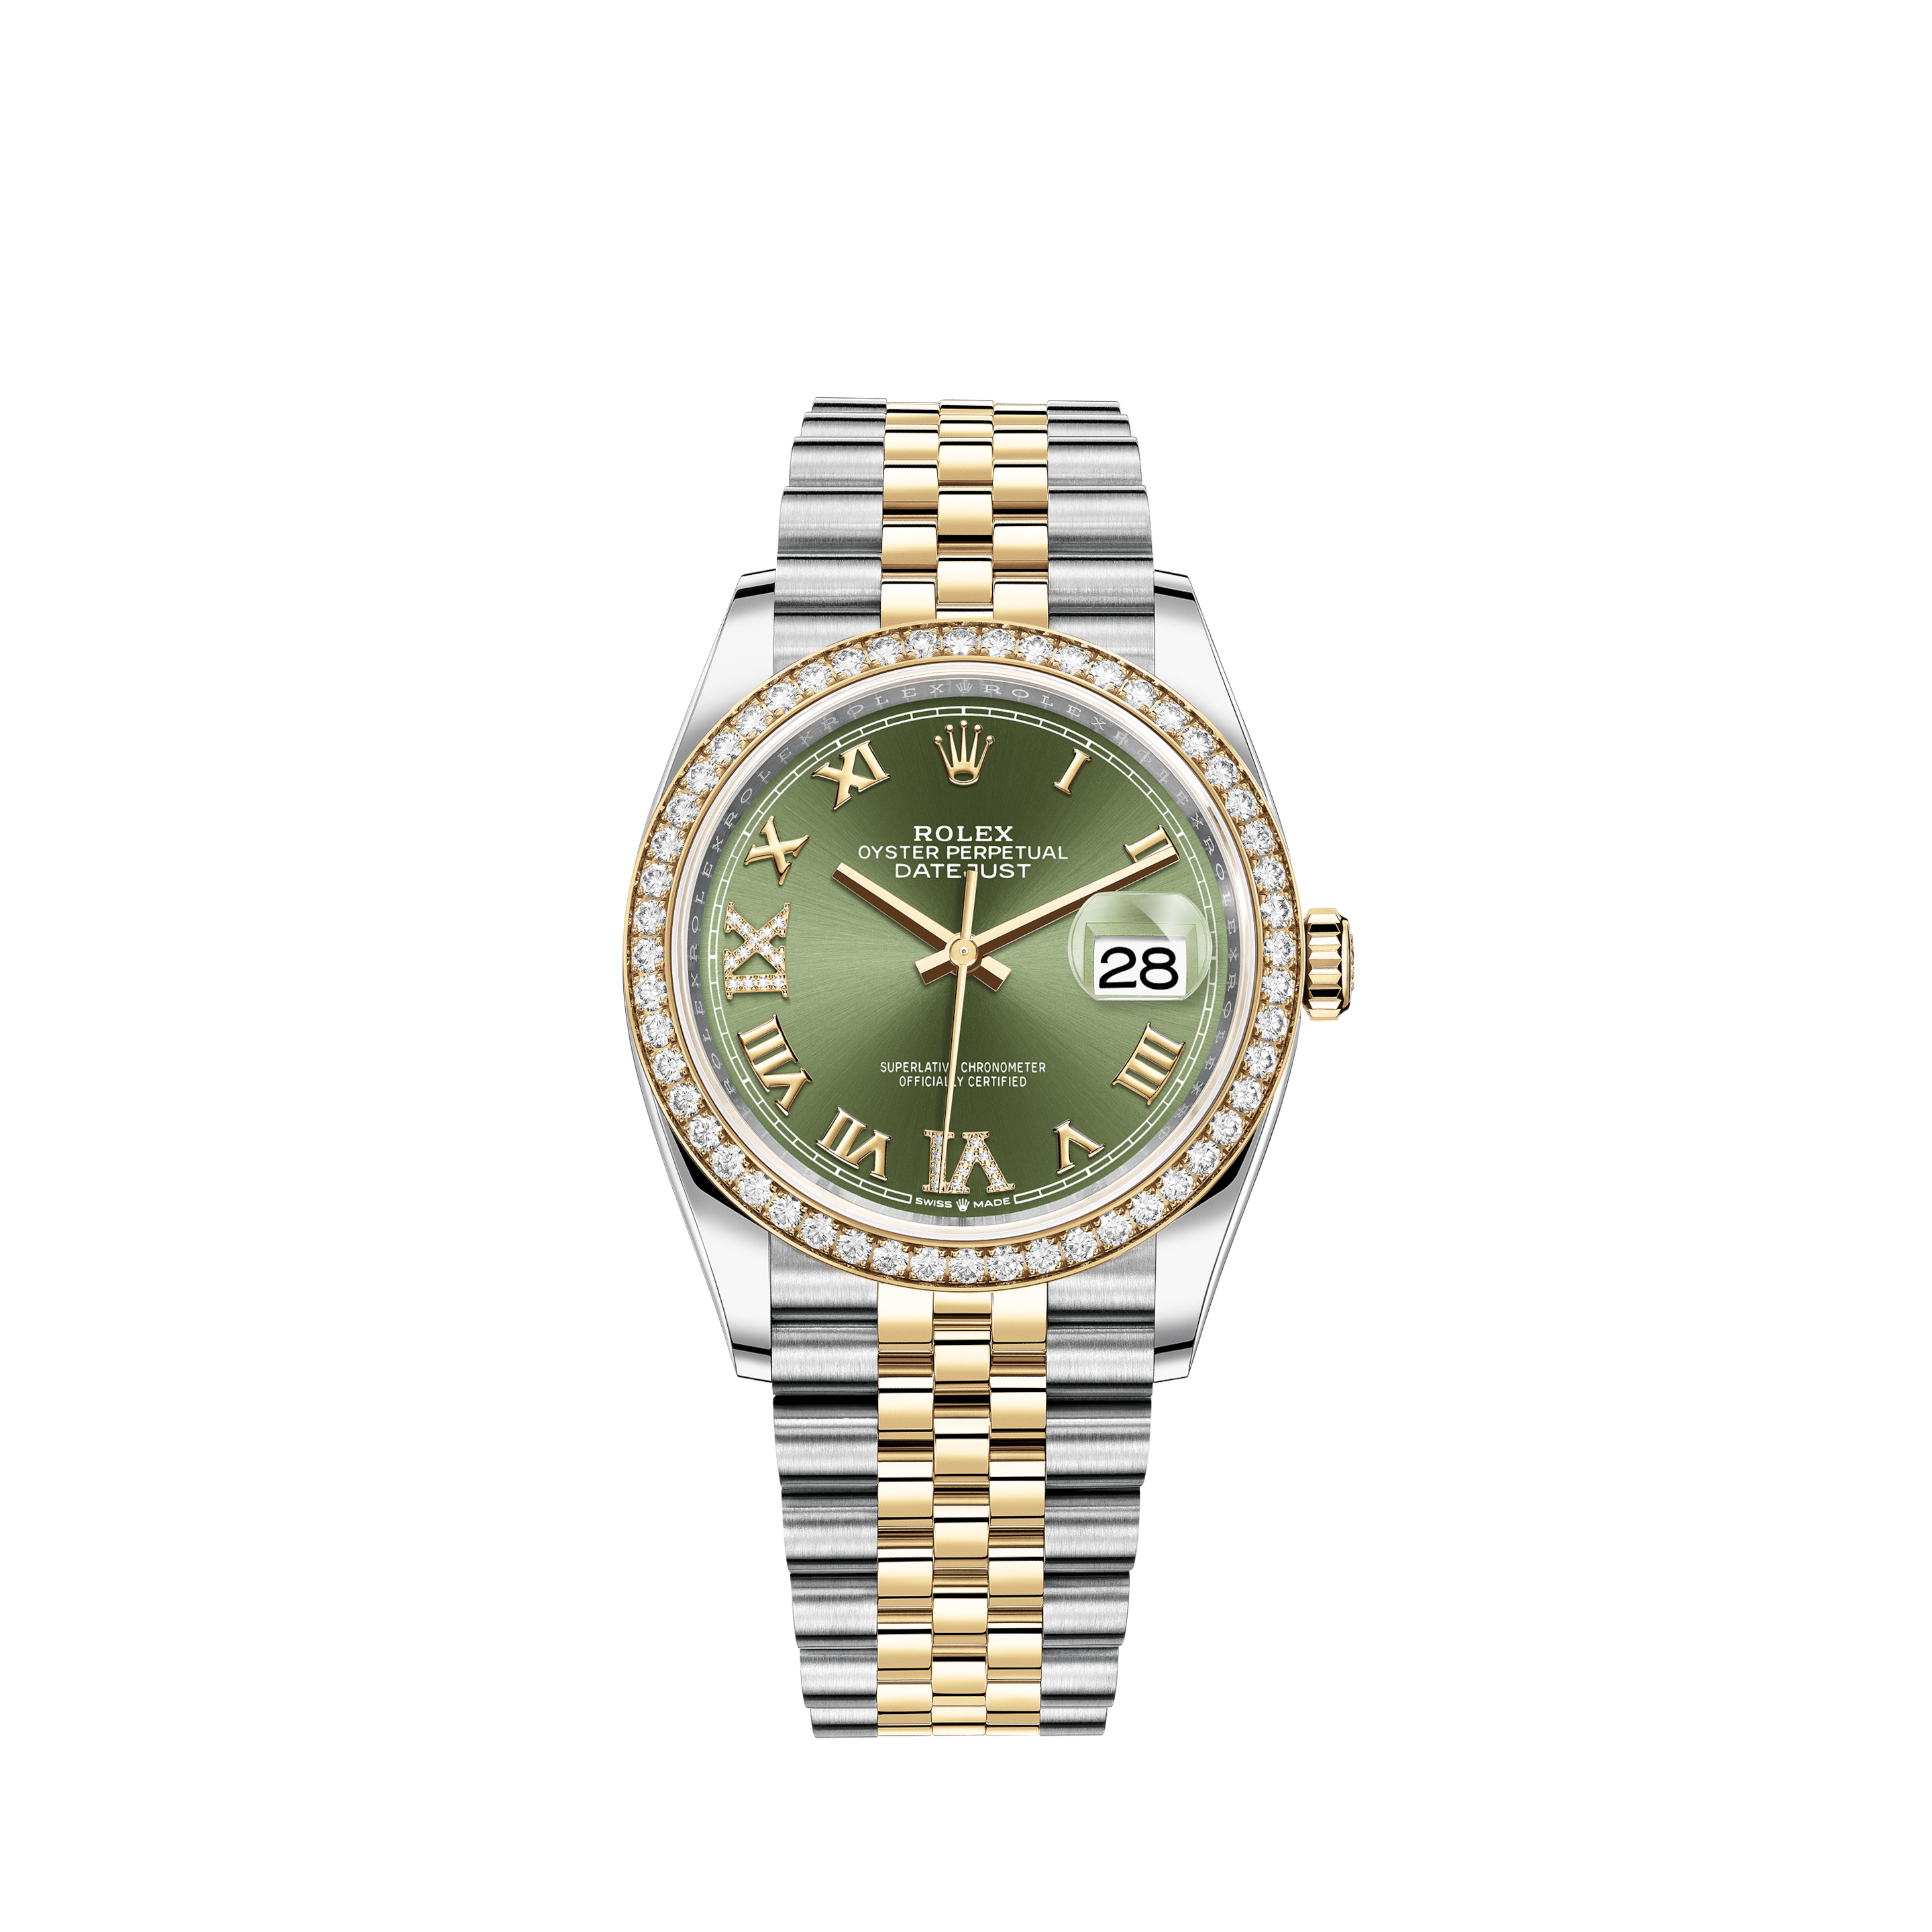 Rolex Sea-Dweller 16600 with Full Set of Box & PapersRolex Oyster Perpetual Day-Date 